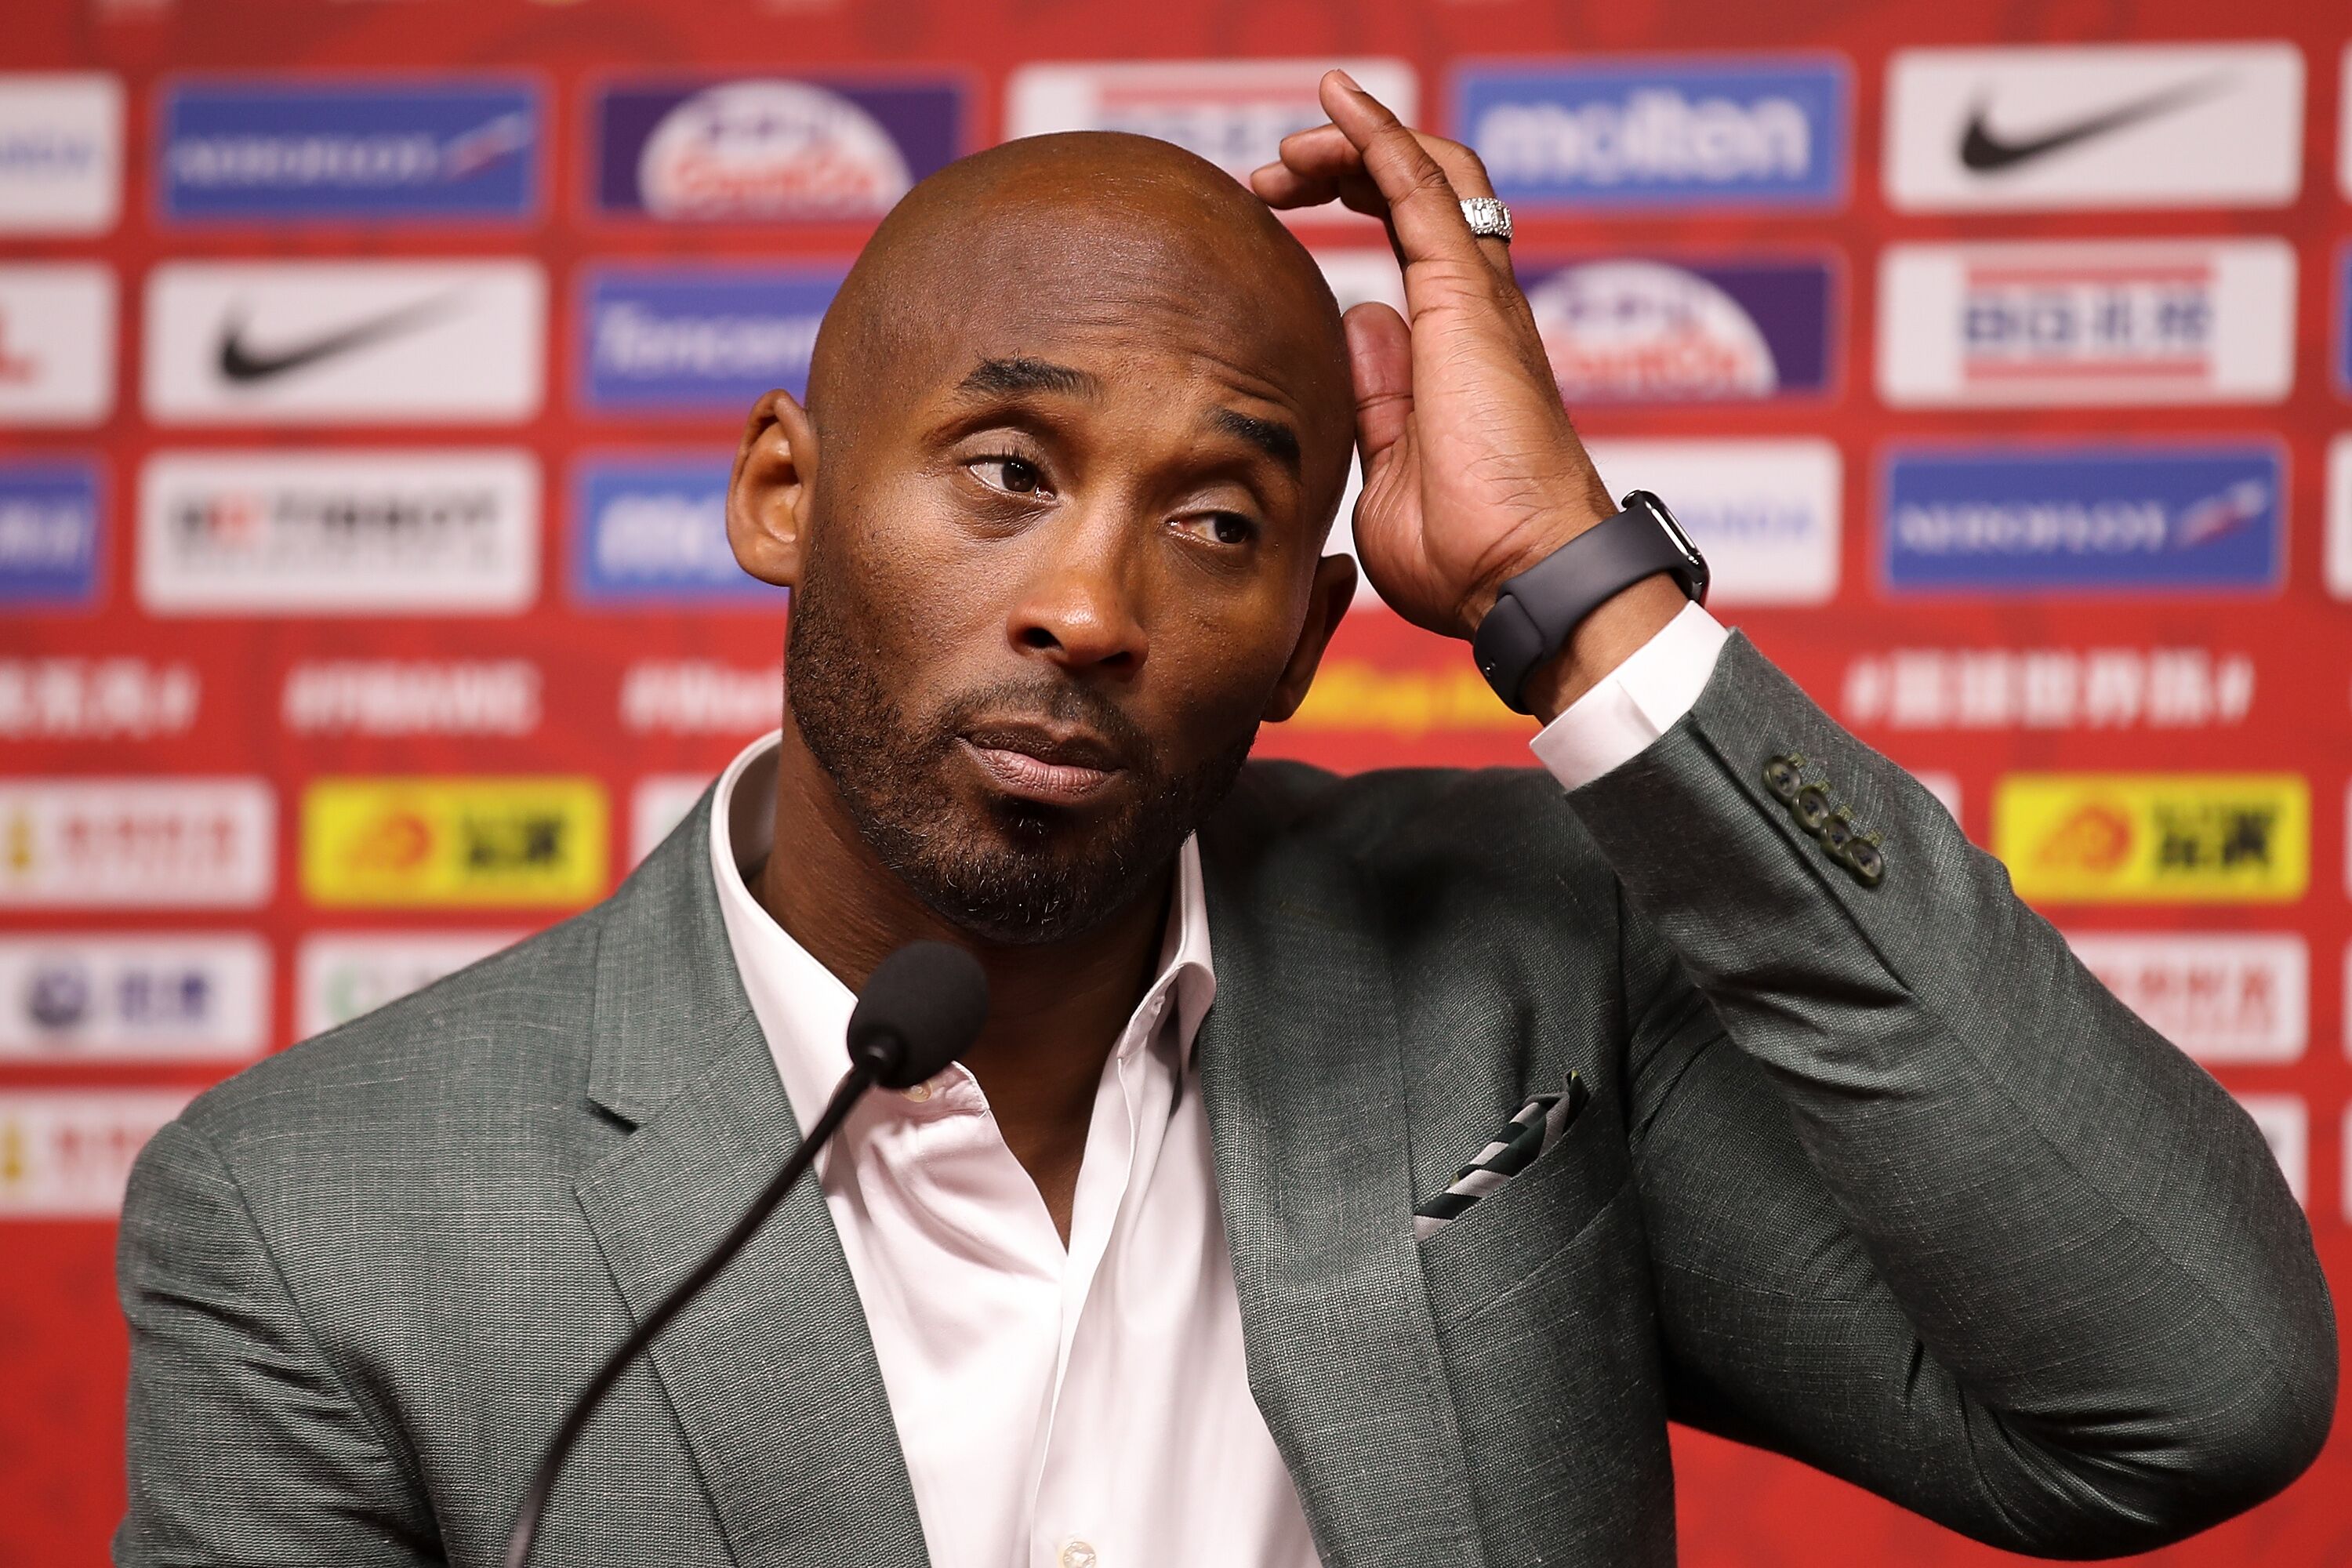 Kobe Bryant talks to the media after the game of Team Spain against Team Australia during the semi-finals of 2019 FIBA World Cup. | Source: Getty Images